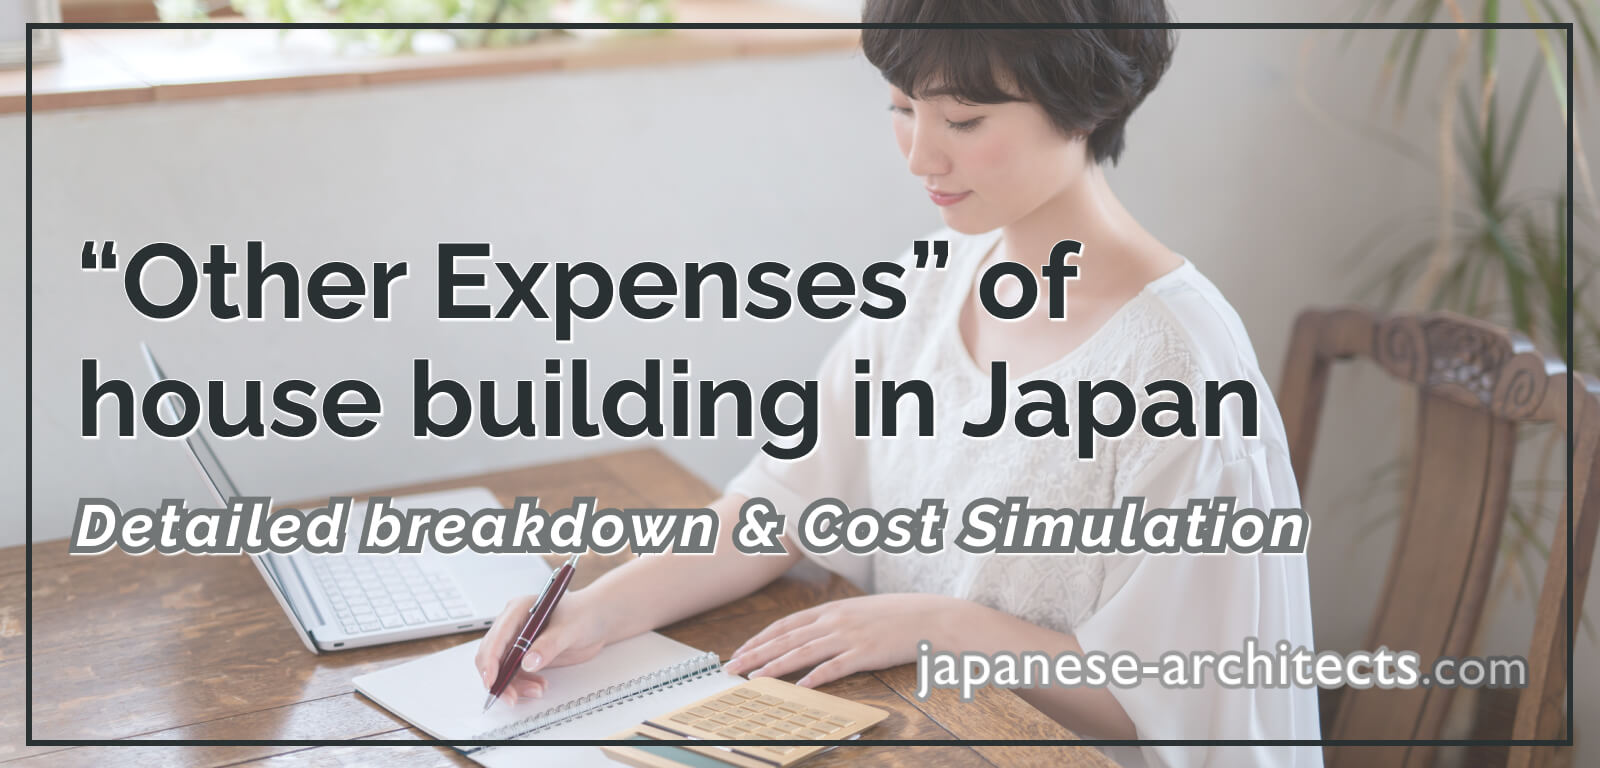 Buying or building a house - which is better in Japan?